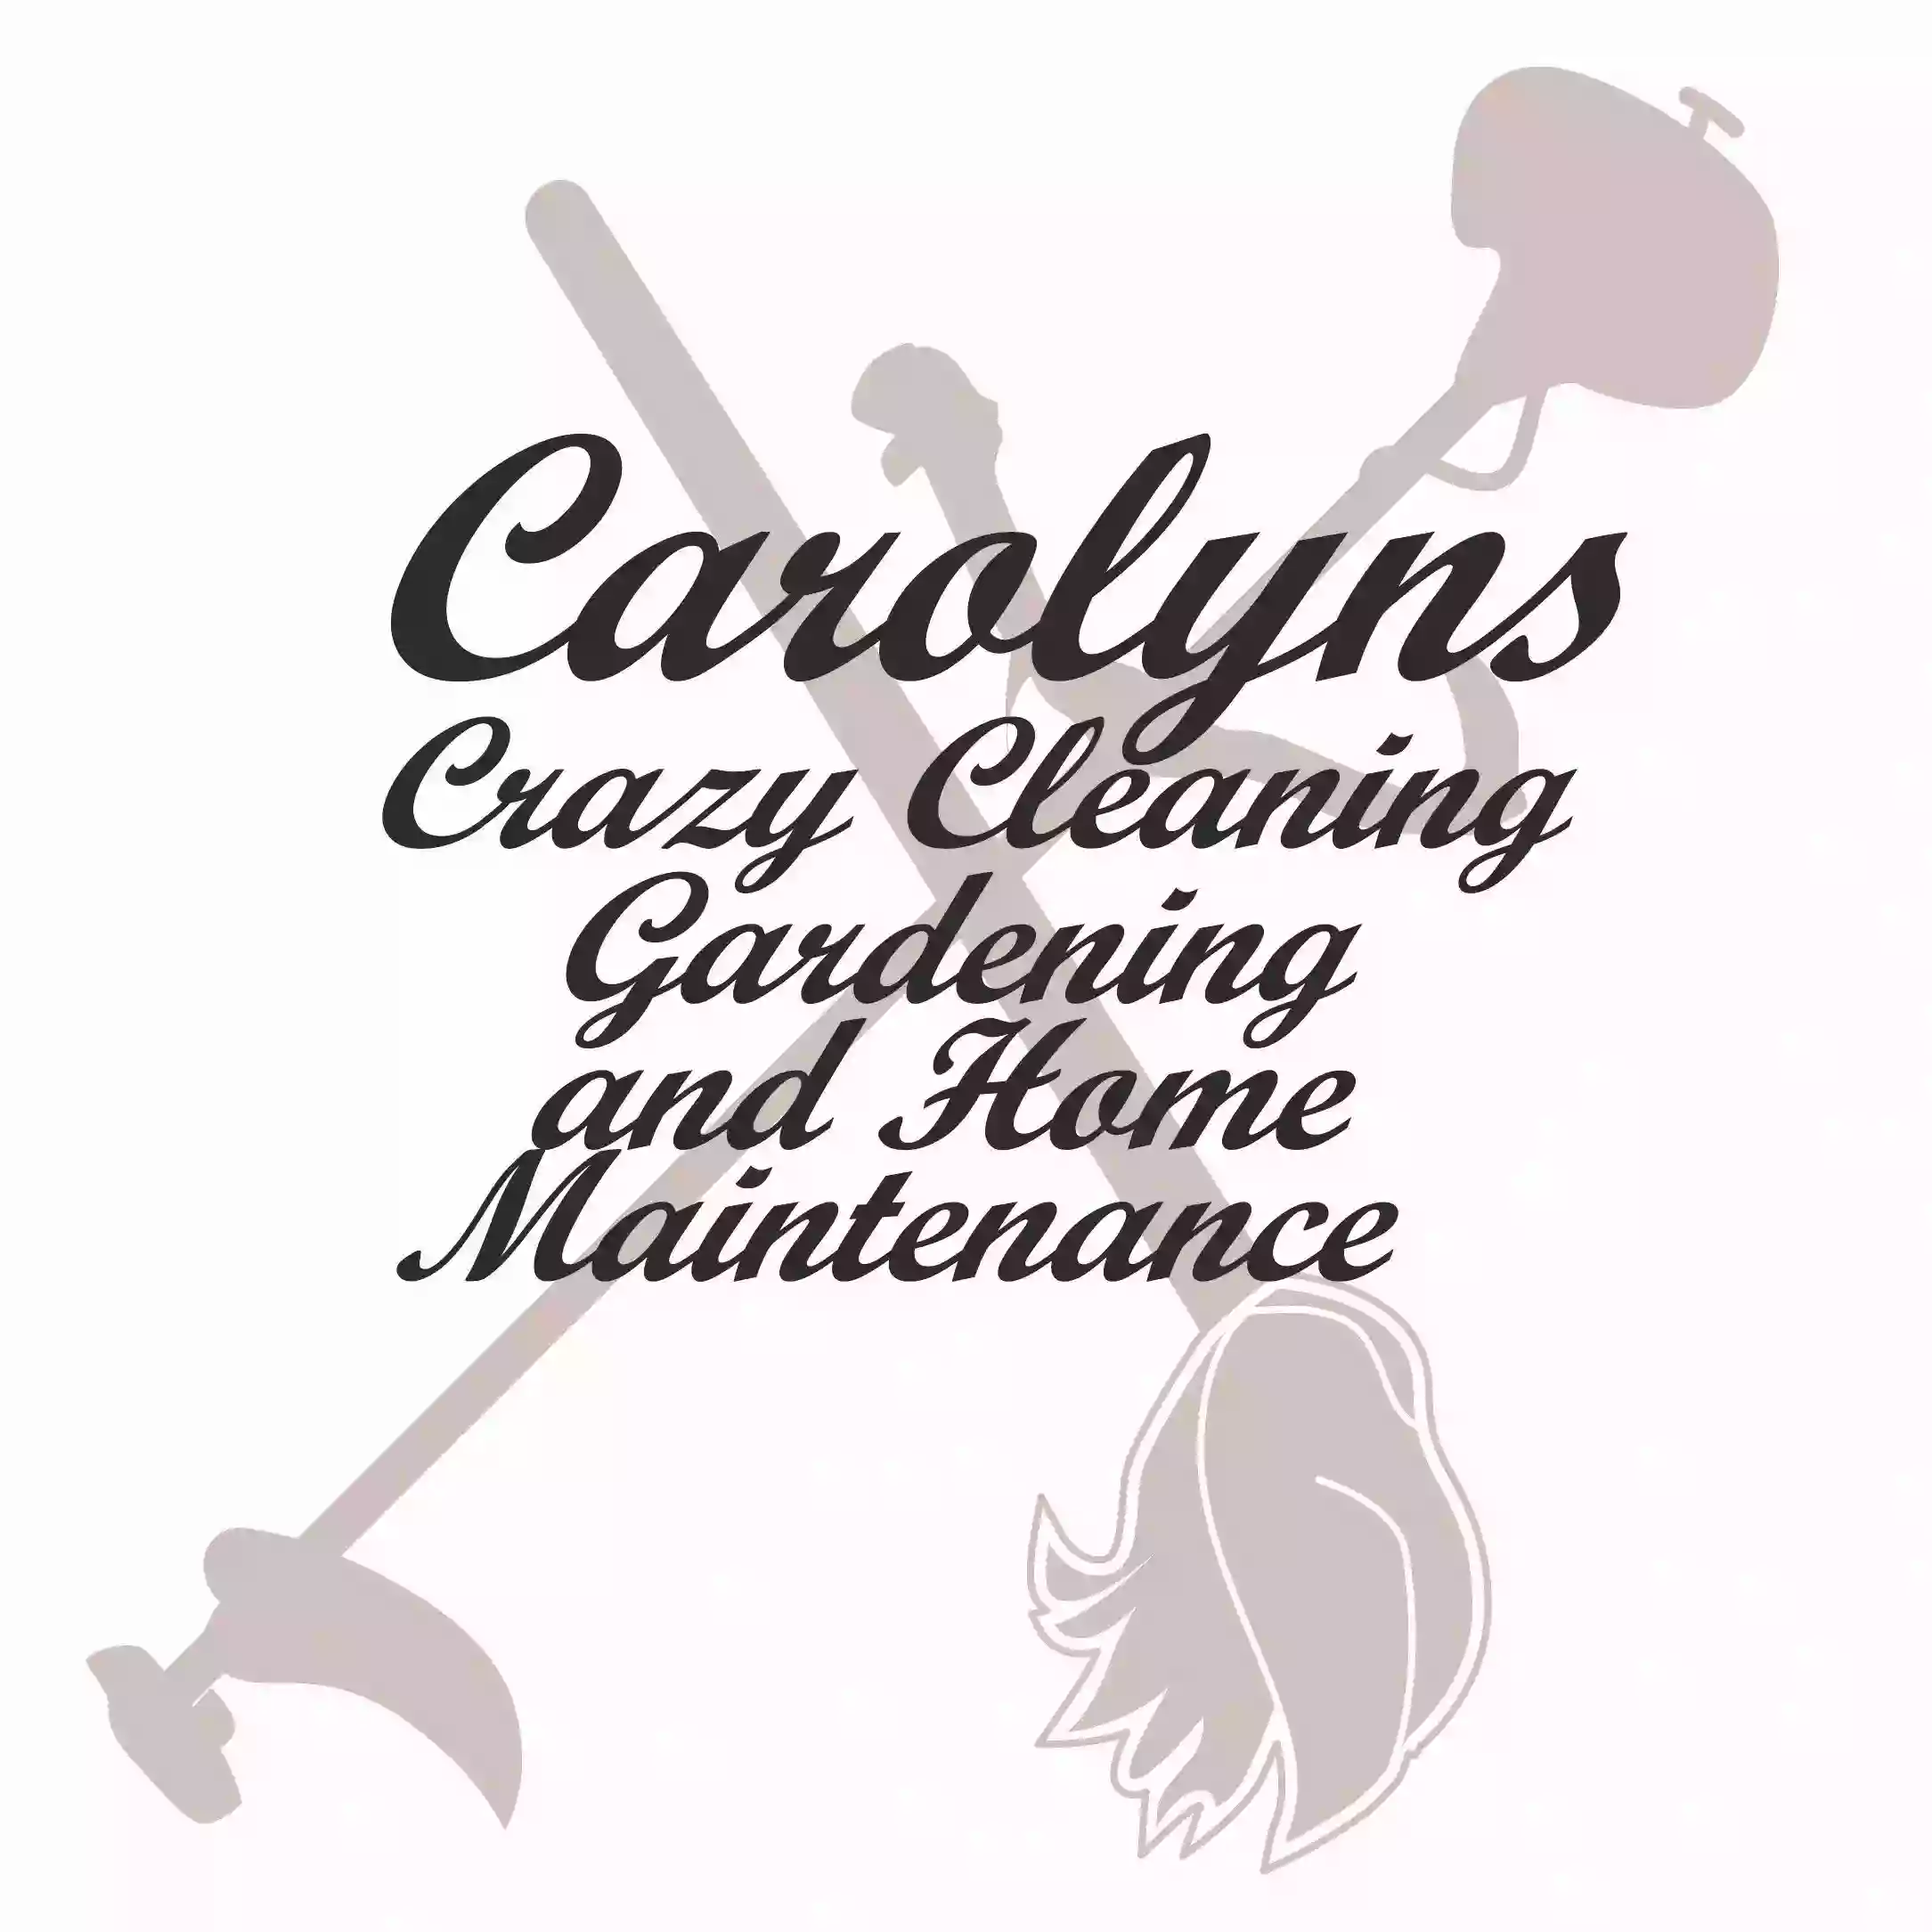 Carolyn’s crazy cleaning, gardening and home maintenance Pty Ltd